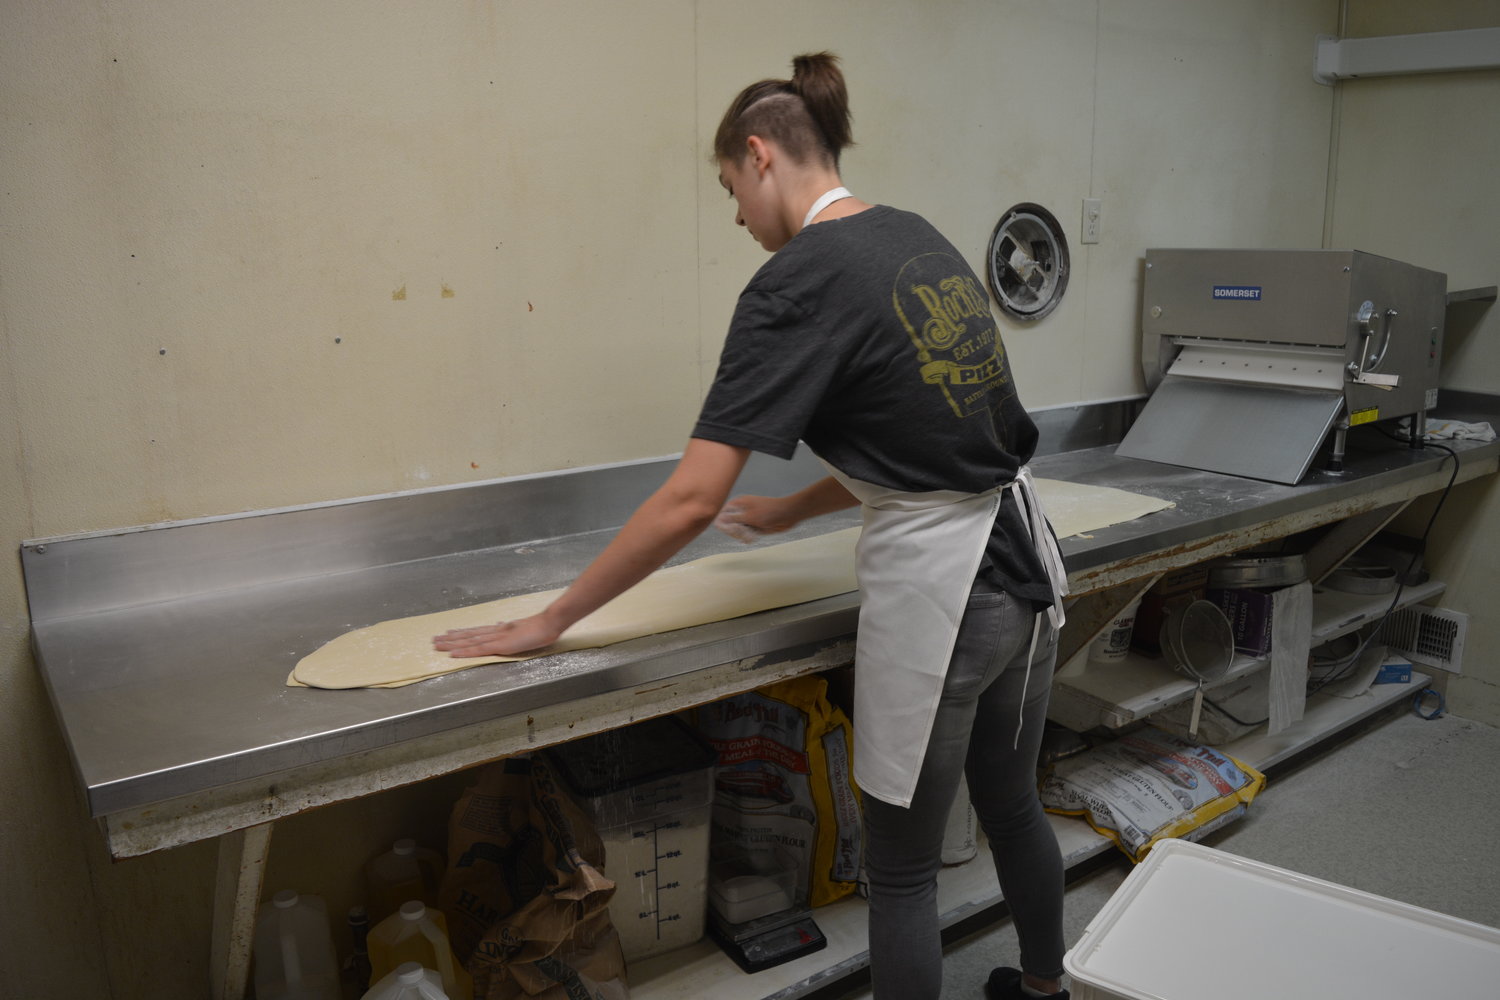 An employee at Rocky’s Pizza & R Bar prepares dough in the back room on July 28.